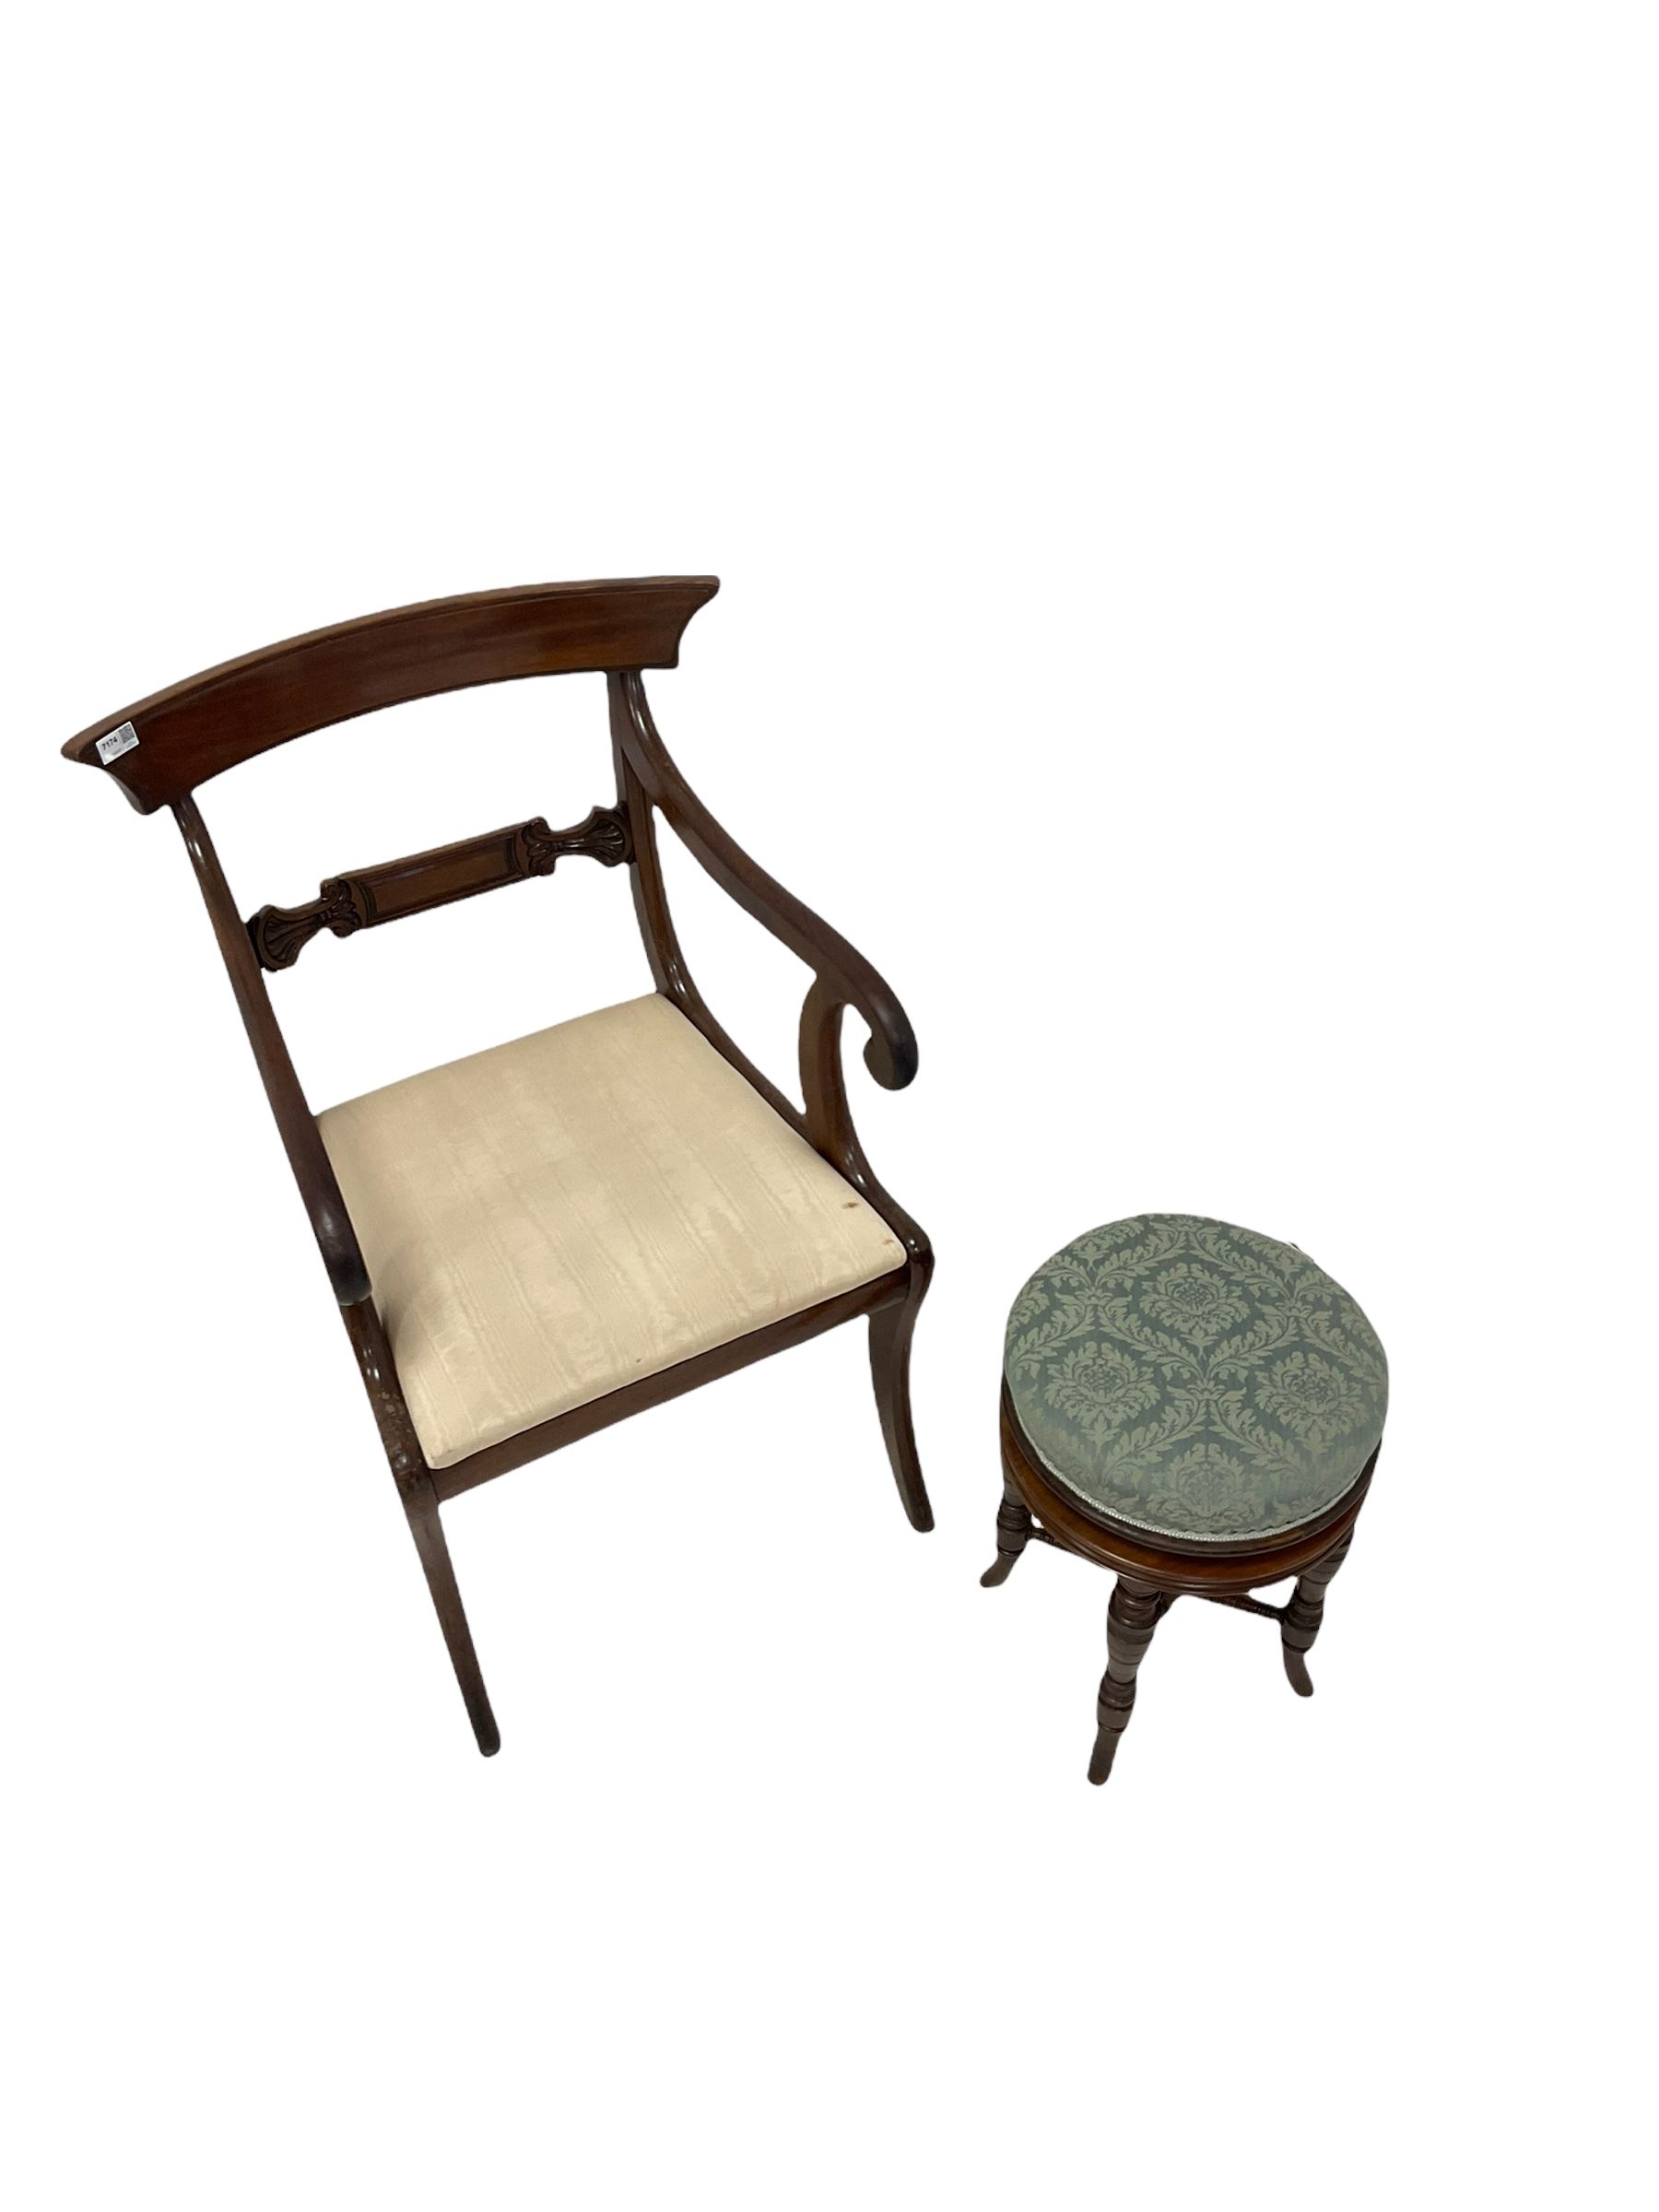 Mahogany regency style carver chair - Image 3 of 4